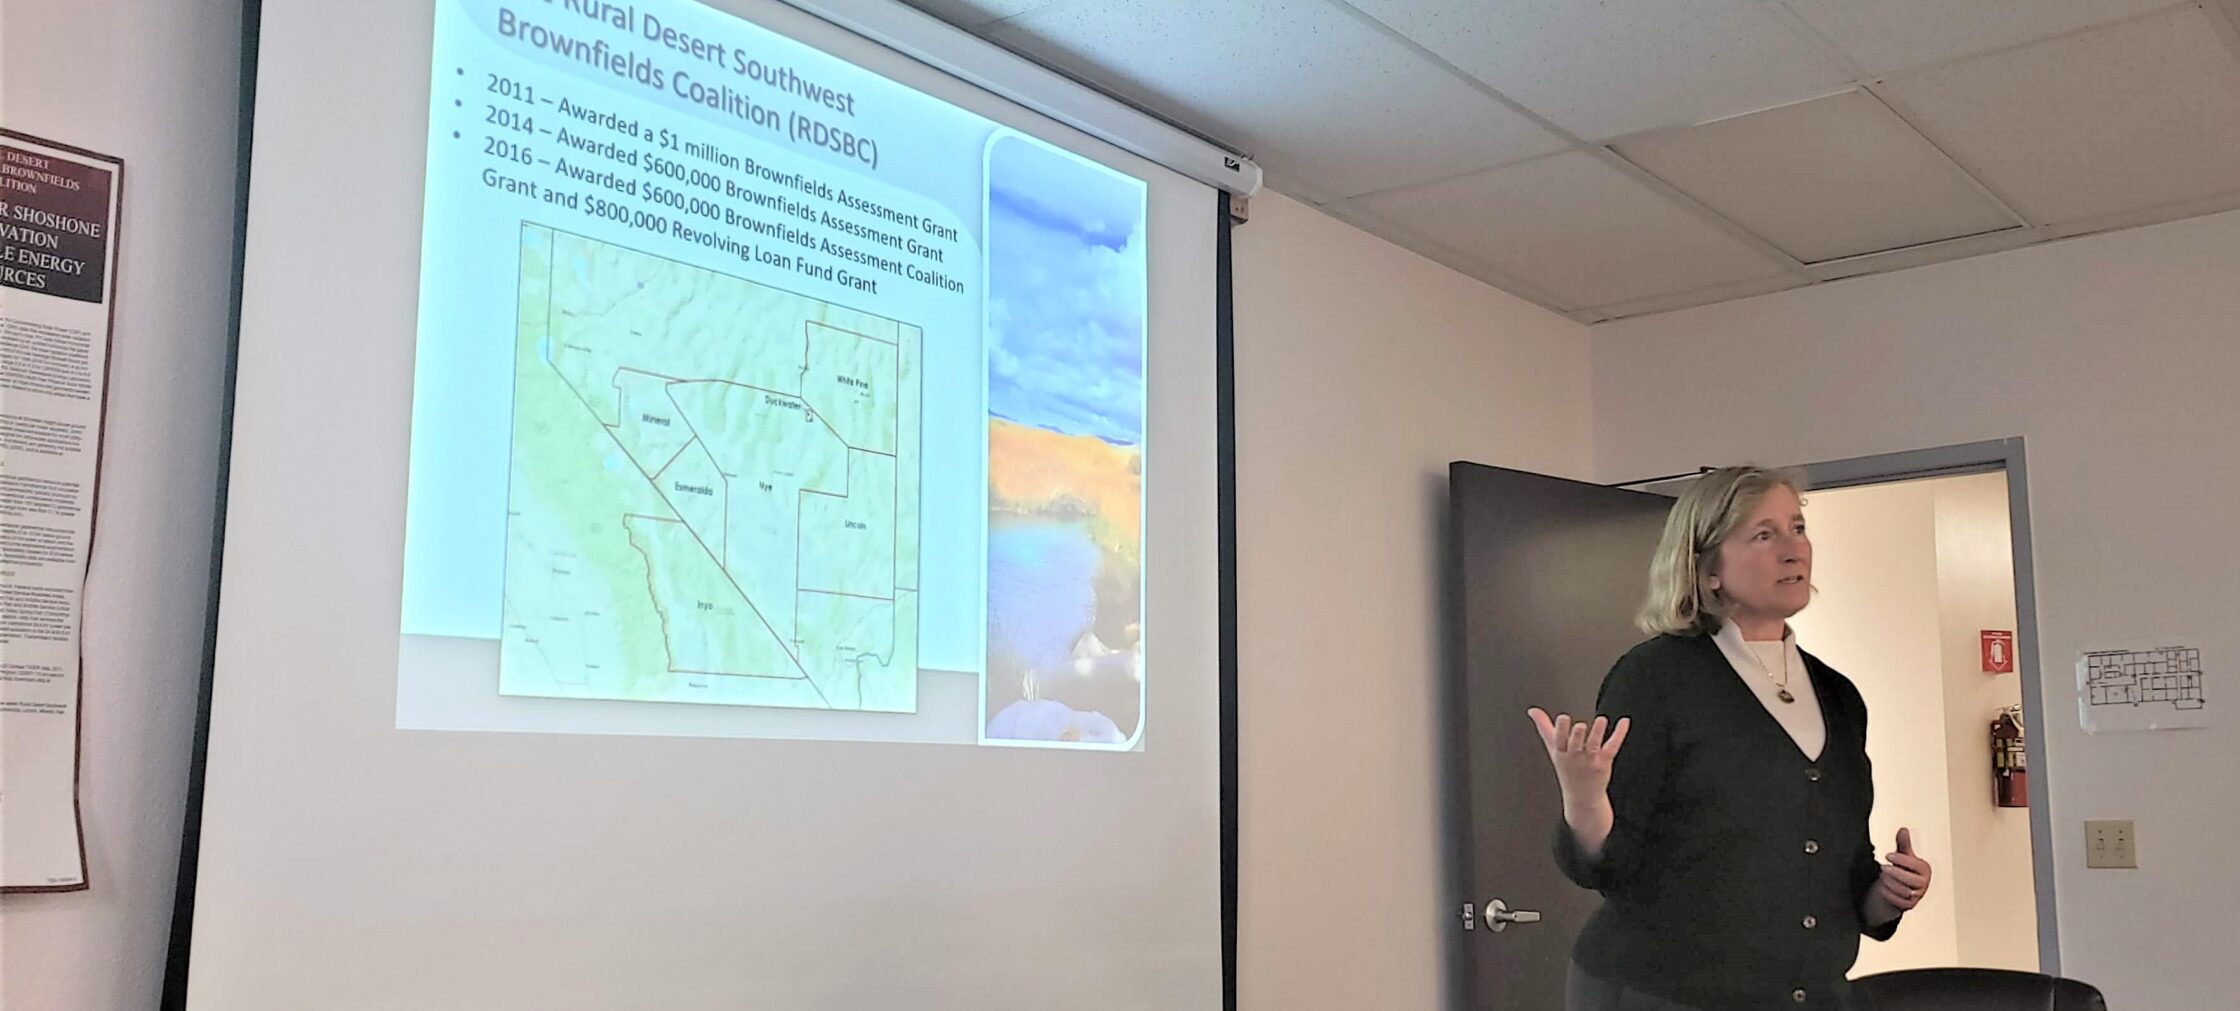 Eileen Christensen, BEC prinicipal, speaks about the Rural Desert Southwest Brownfields Coalition at a tribal meeting in Duckwater Nevada